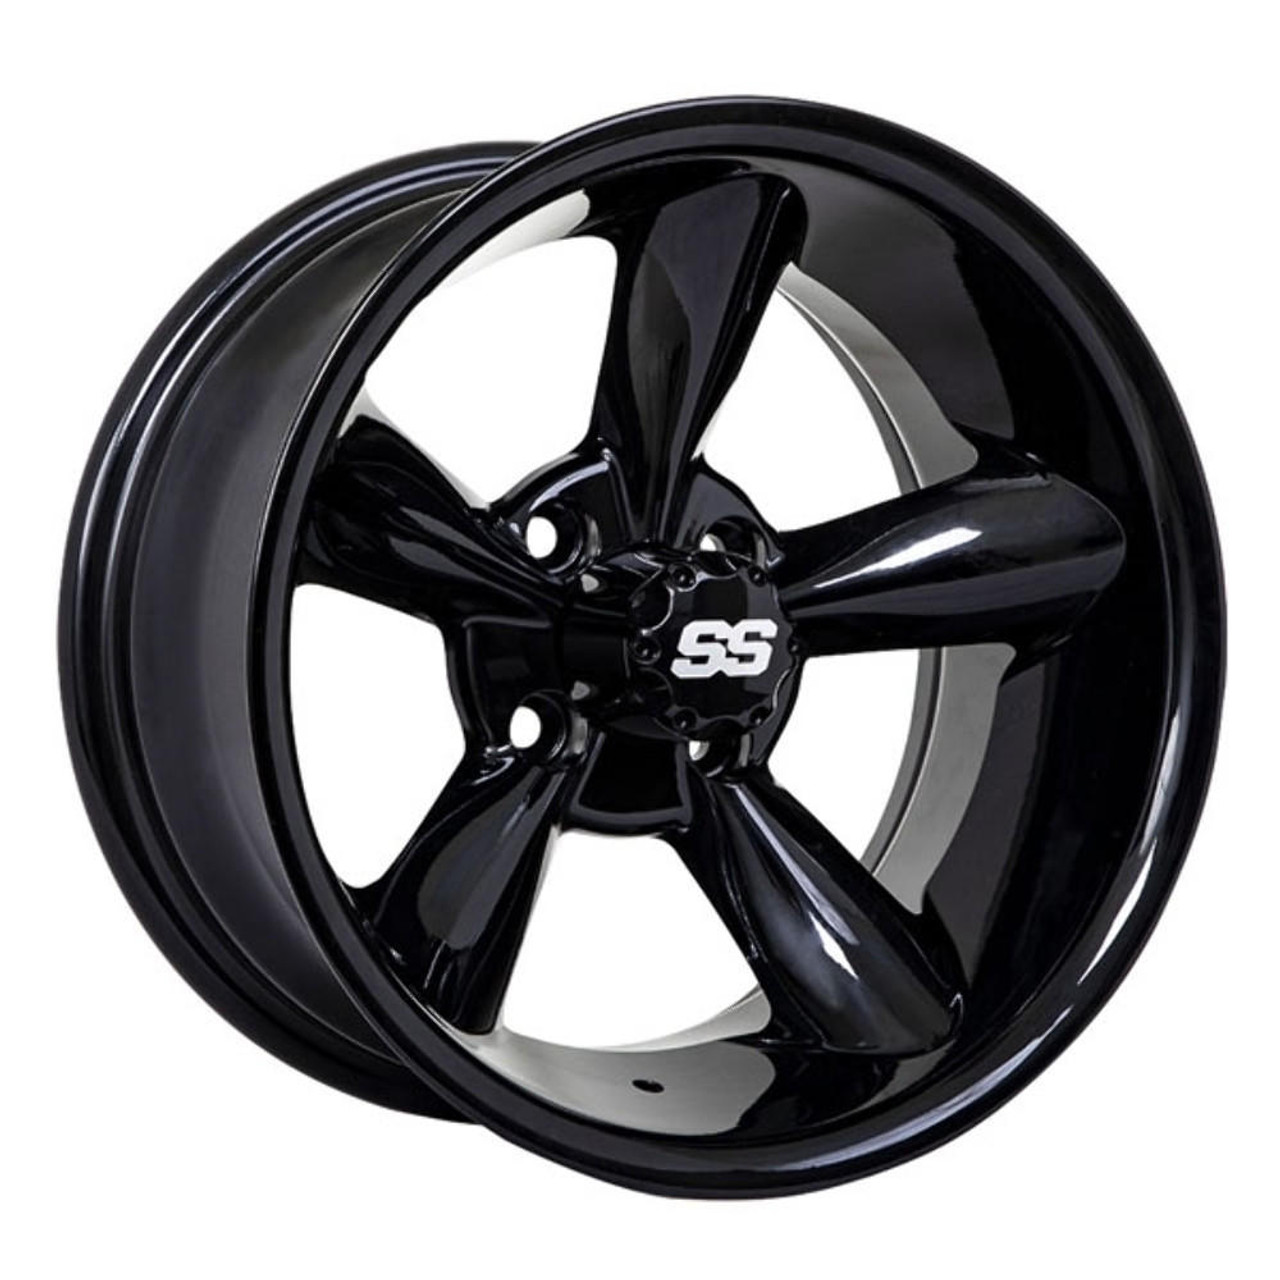  GTW 14" GODFATHER  Black Wheels with Choice of Off-Road Tires - (Set of 4) 